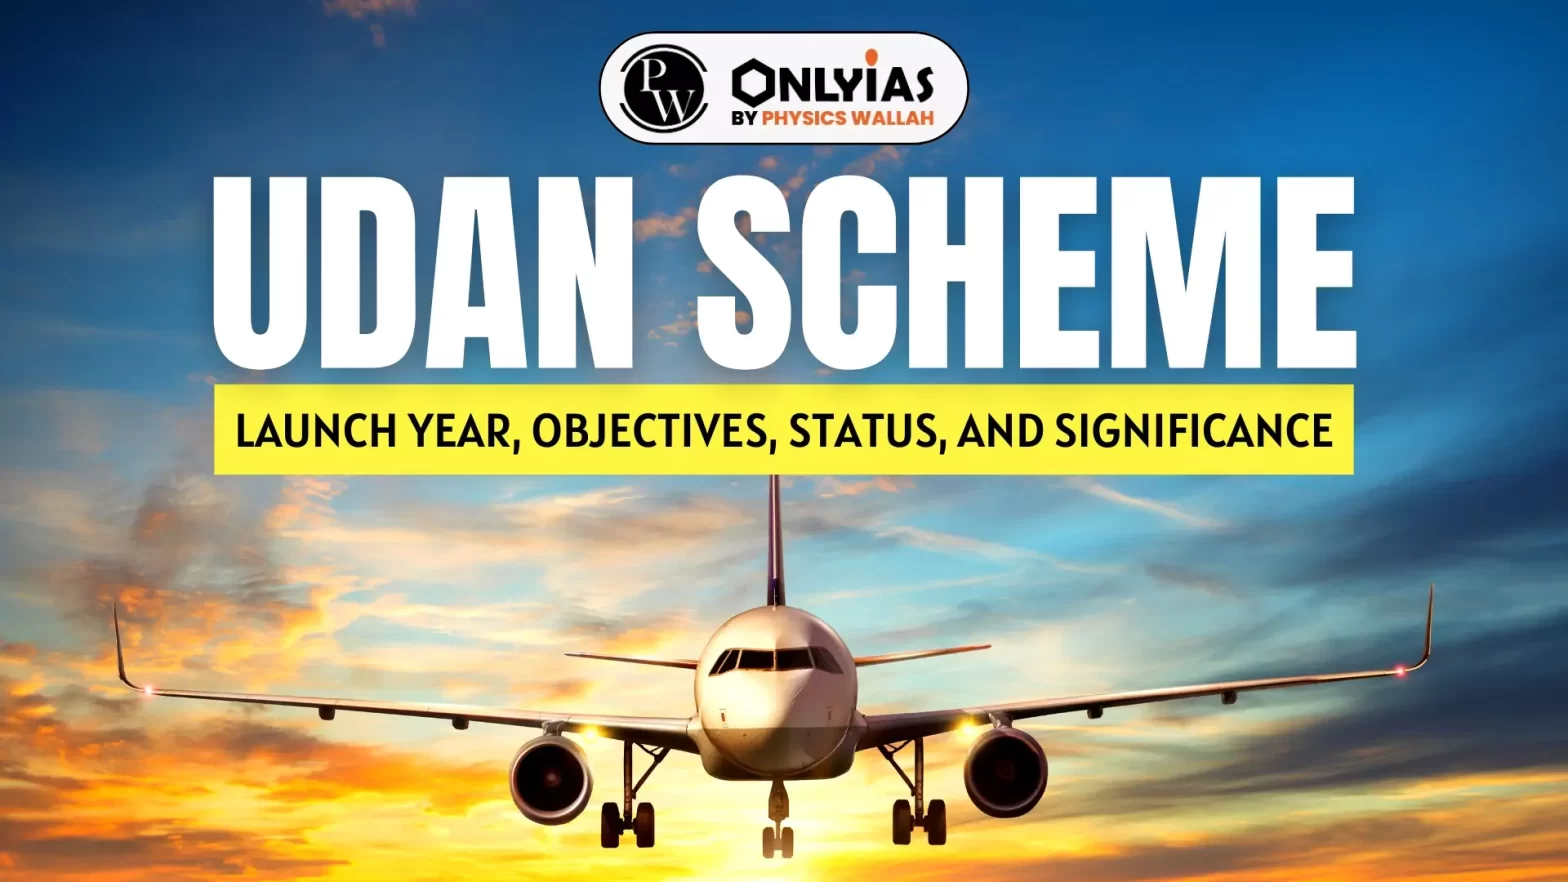 UDAN Scheme: Launch Year, Objectives, Status, and Significance